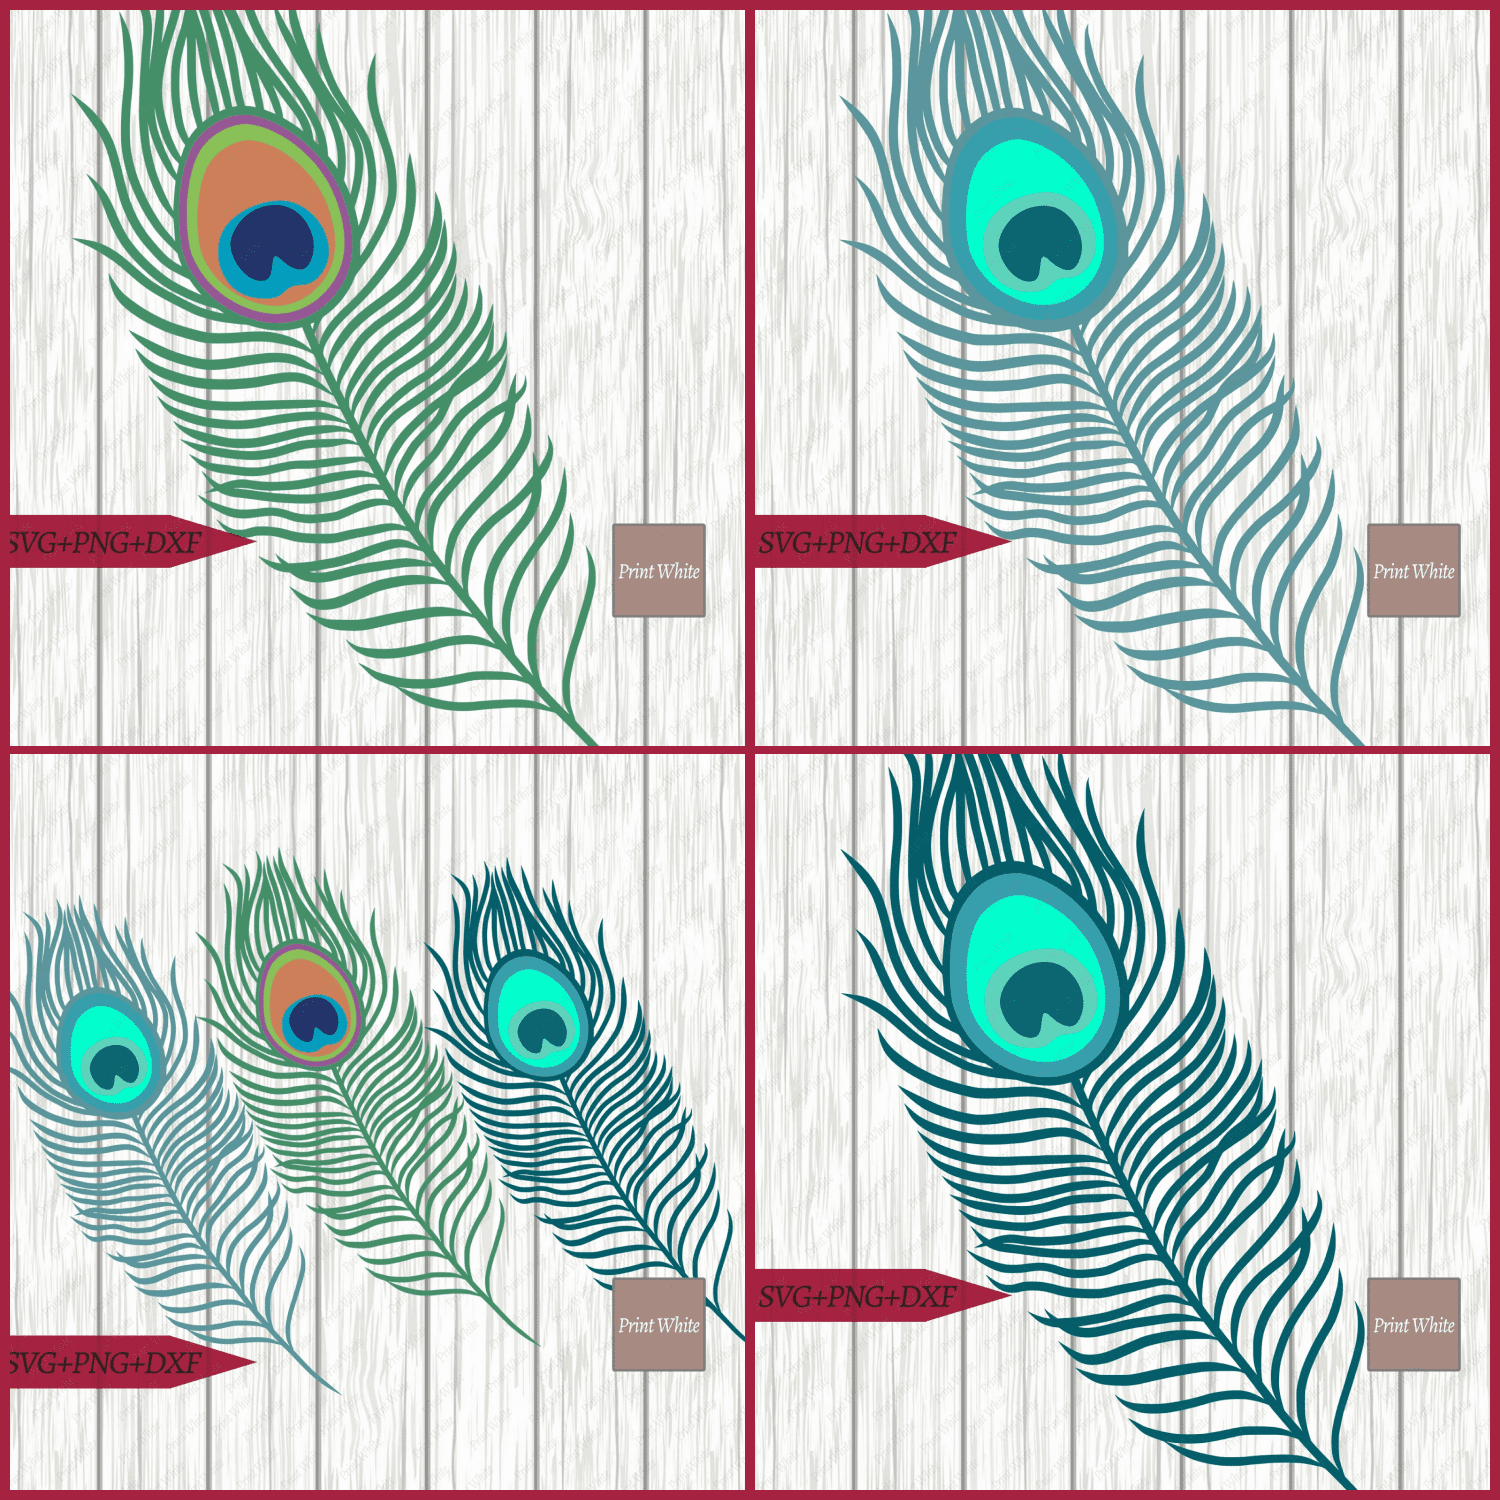 Peacock Feather Svg cover.